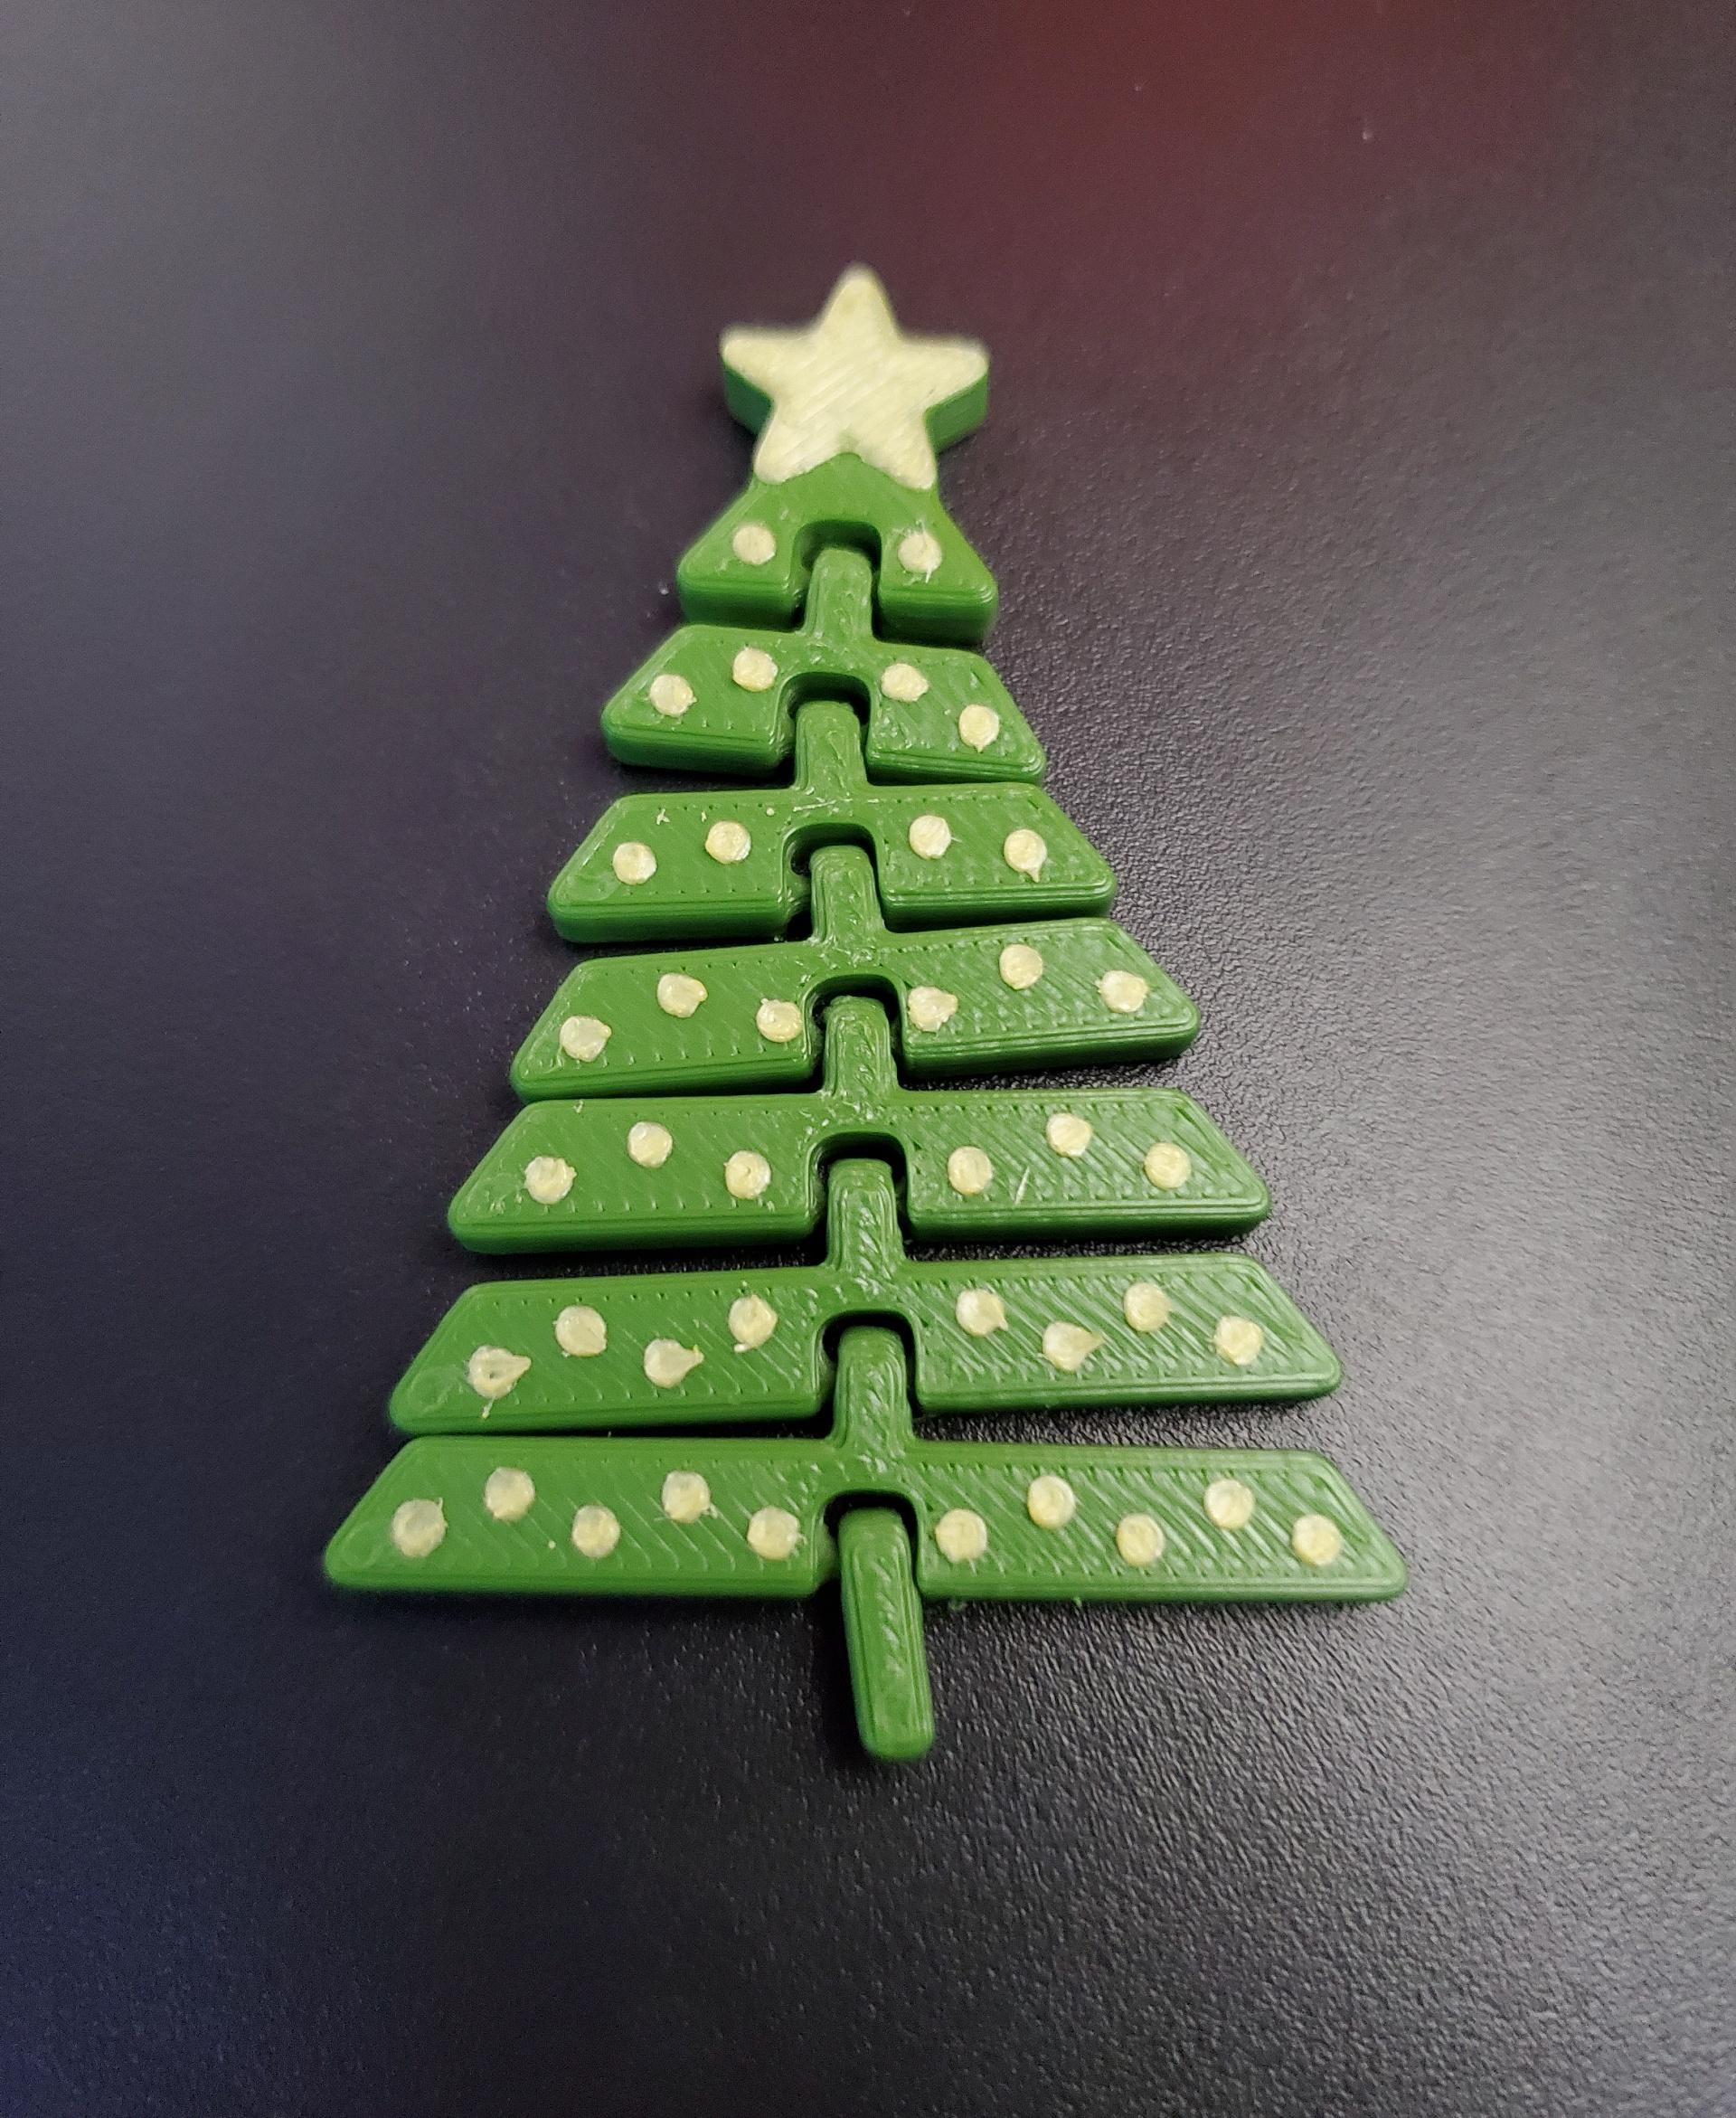 Articulated Christmas Tree with Star and Ornaments - Print in place fidget toys - 3mf - polymaker jungle green - 3d model